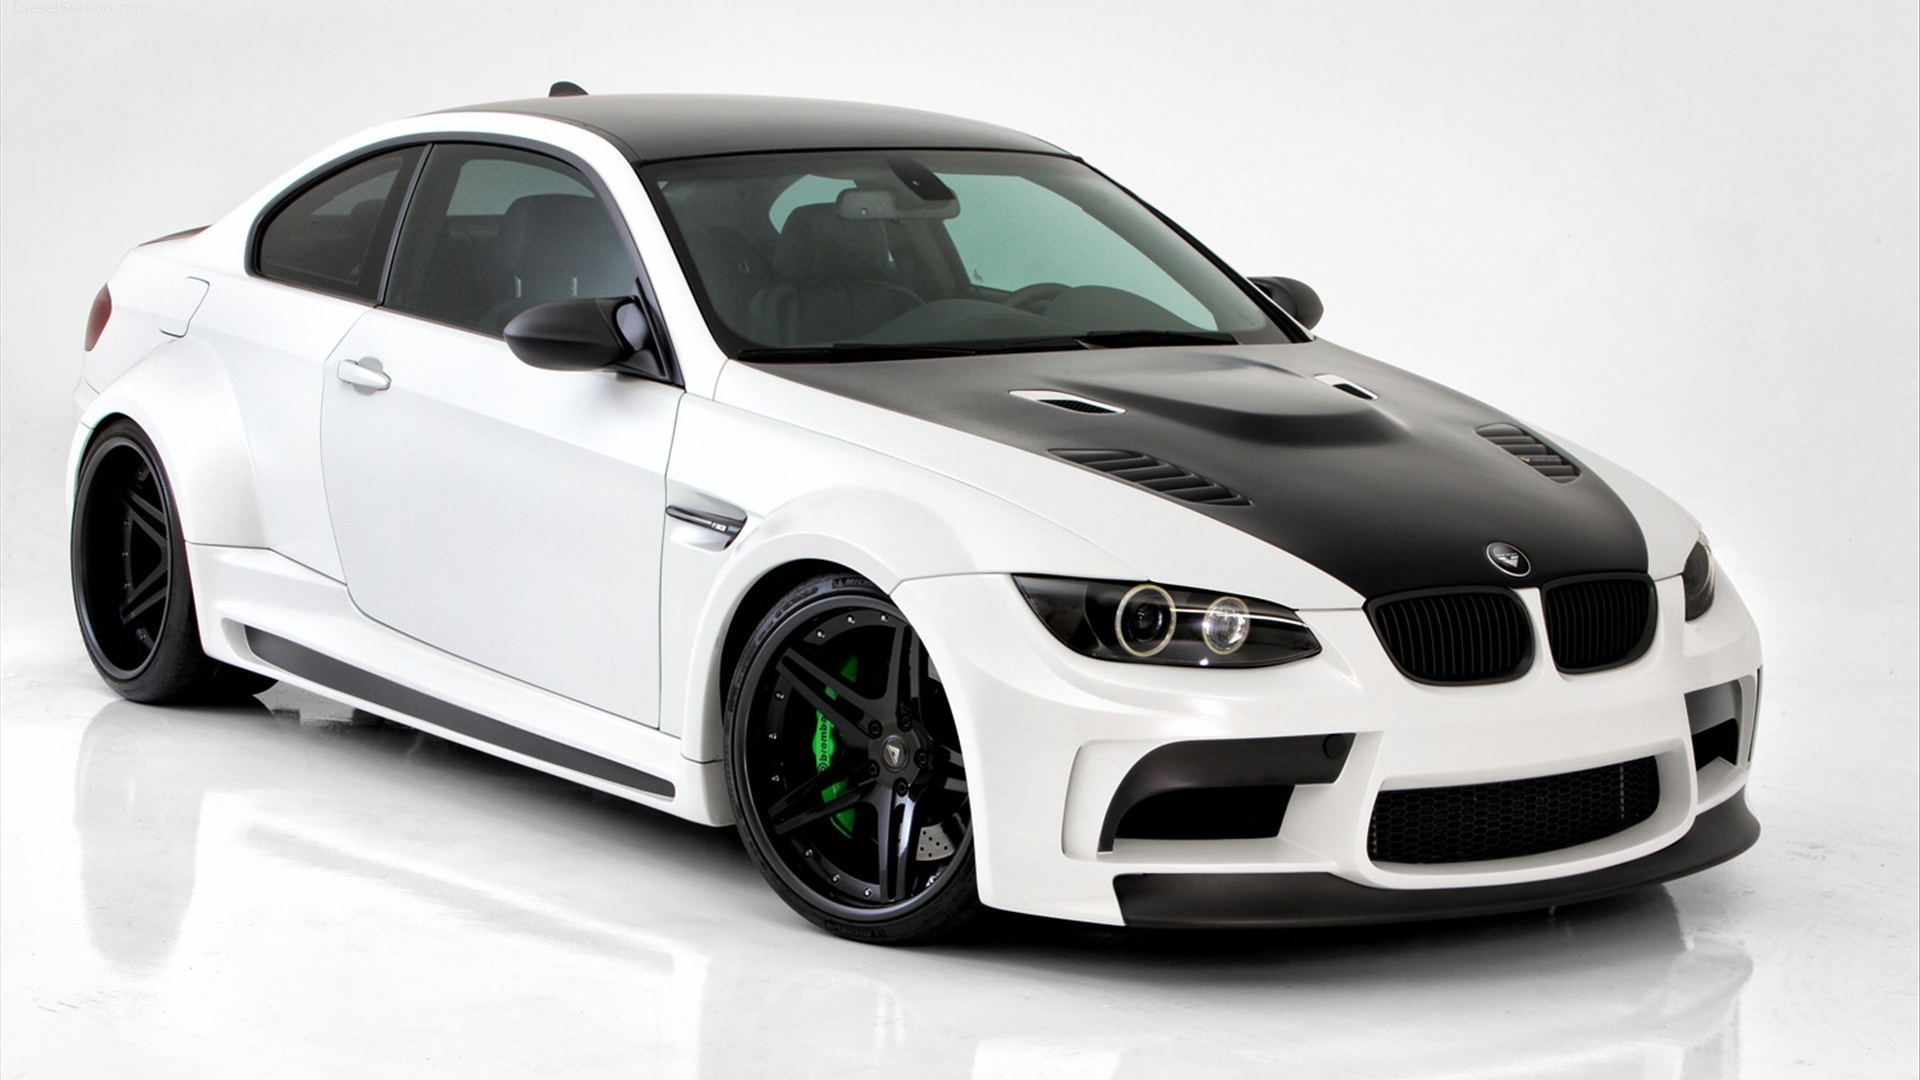 Bmw Cars Hd Wallpapers Free Downlo - Bmw Cars Images Free Download - HD Wallpaper 